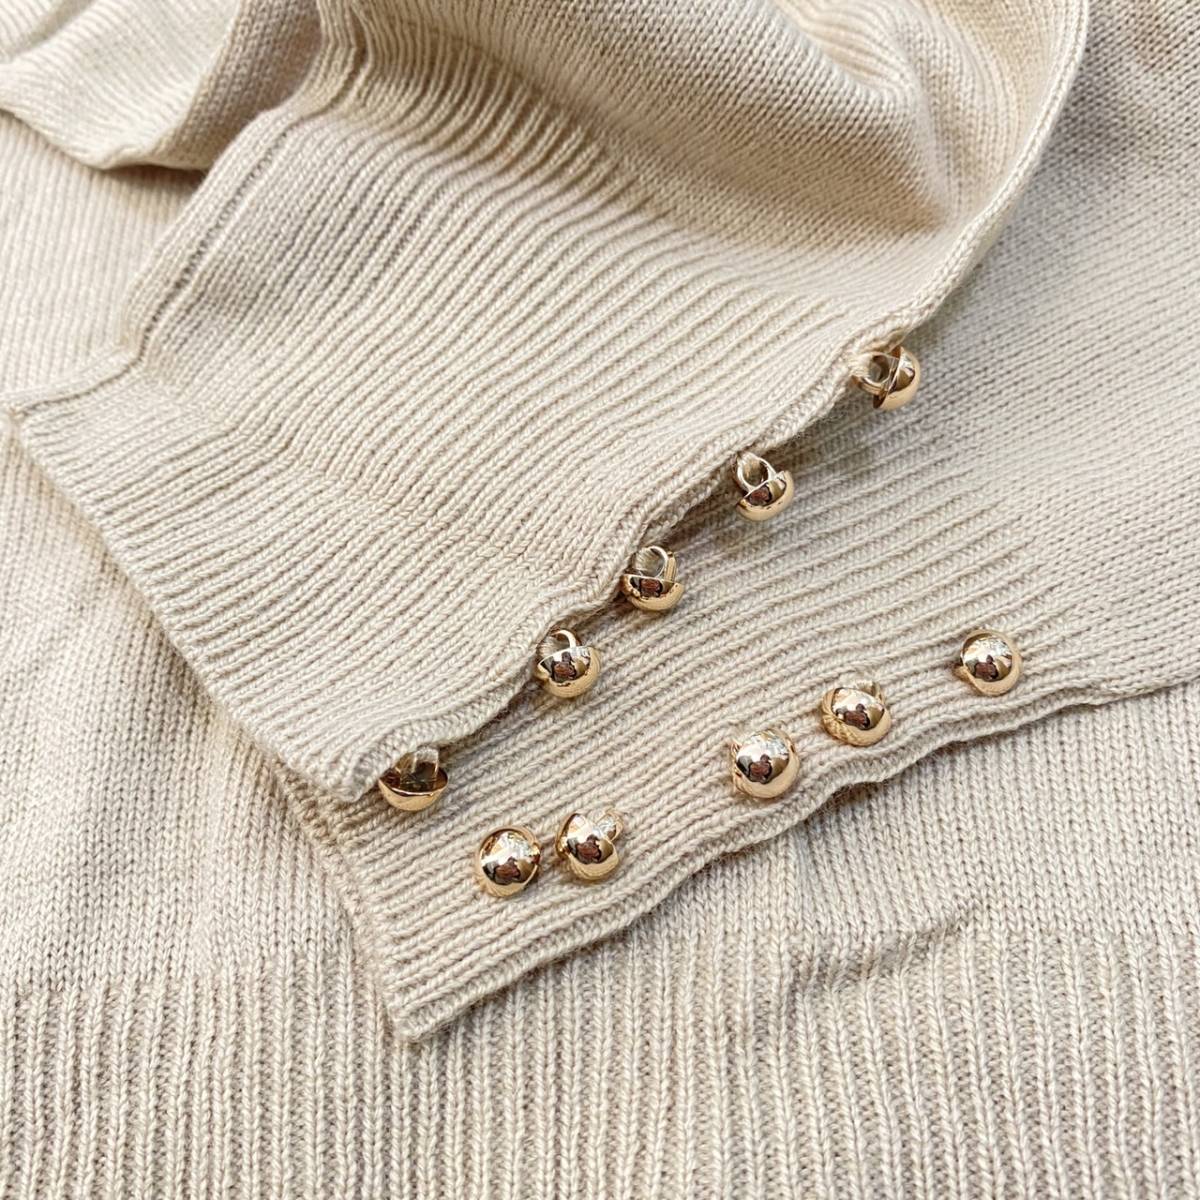 [*book@169] E hyphen world gallery piece sleeve button knitted pull over free size light beige lady's tag attaching unused 